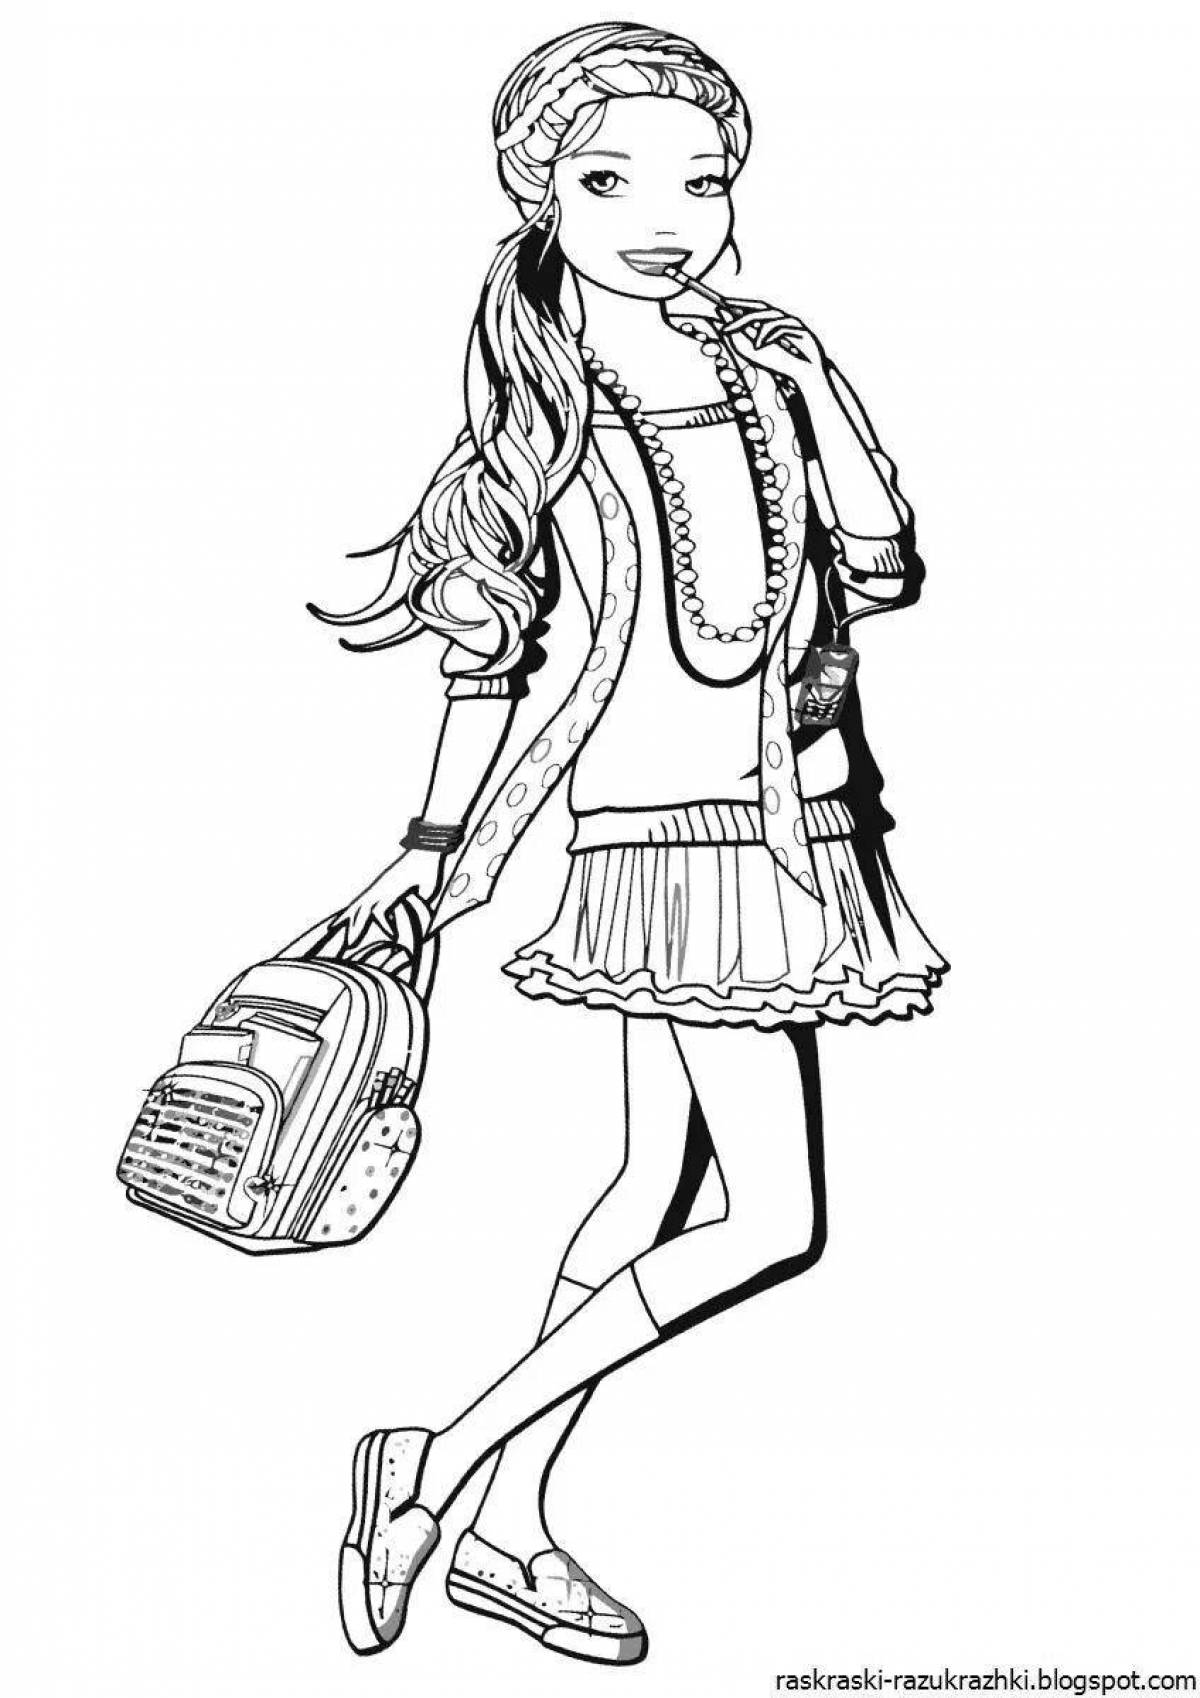 Coloring page energetic fashionista